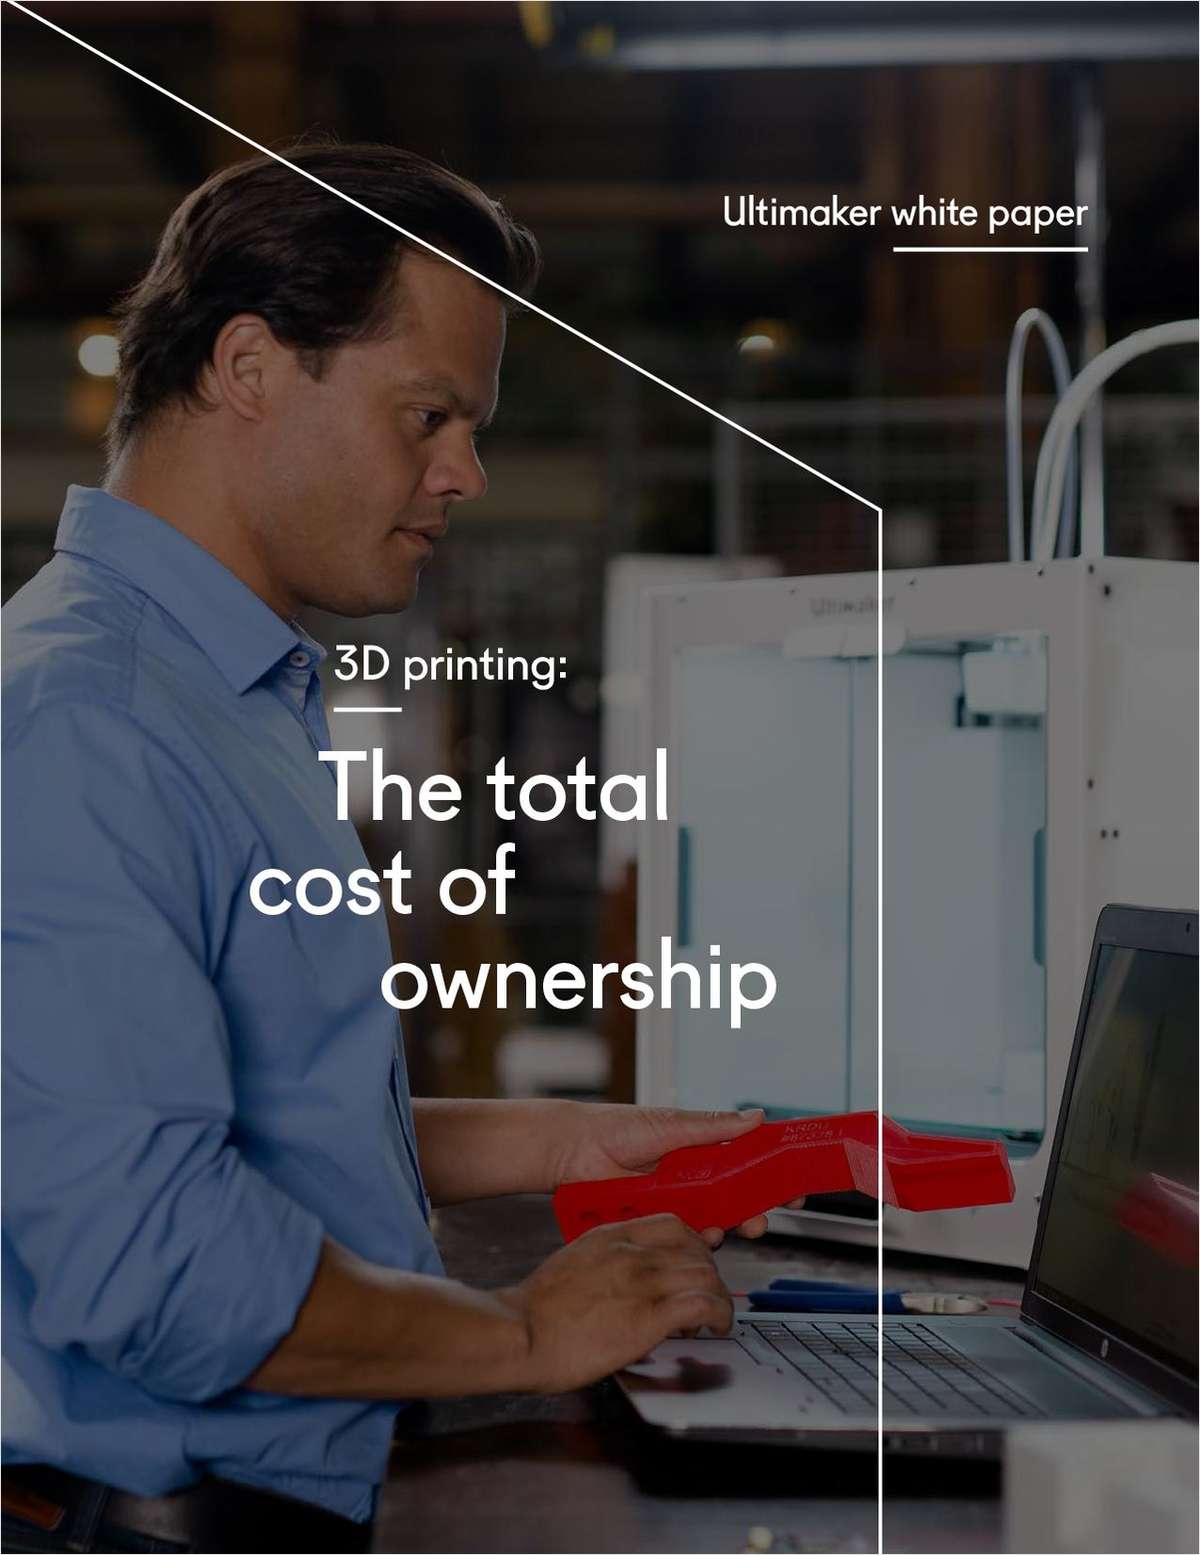 3D printing: The total cost of ownership